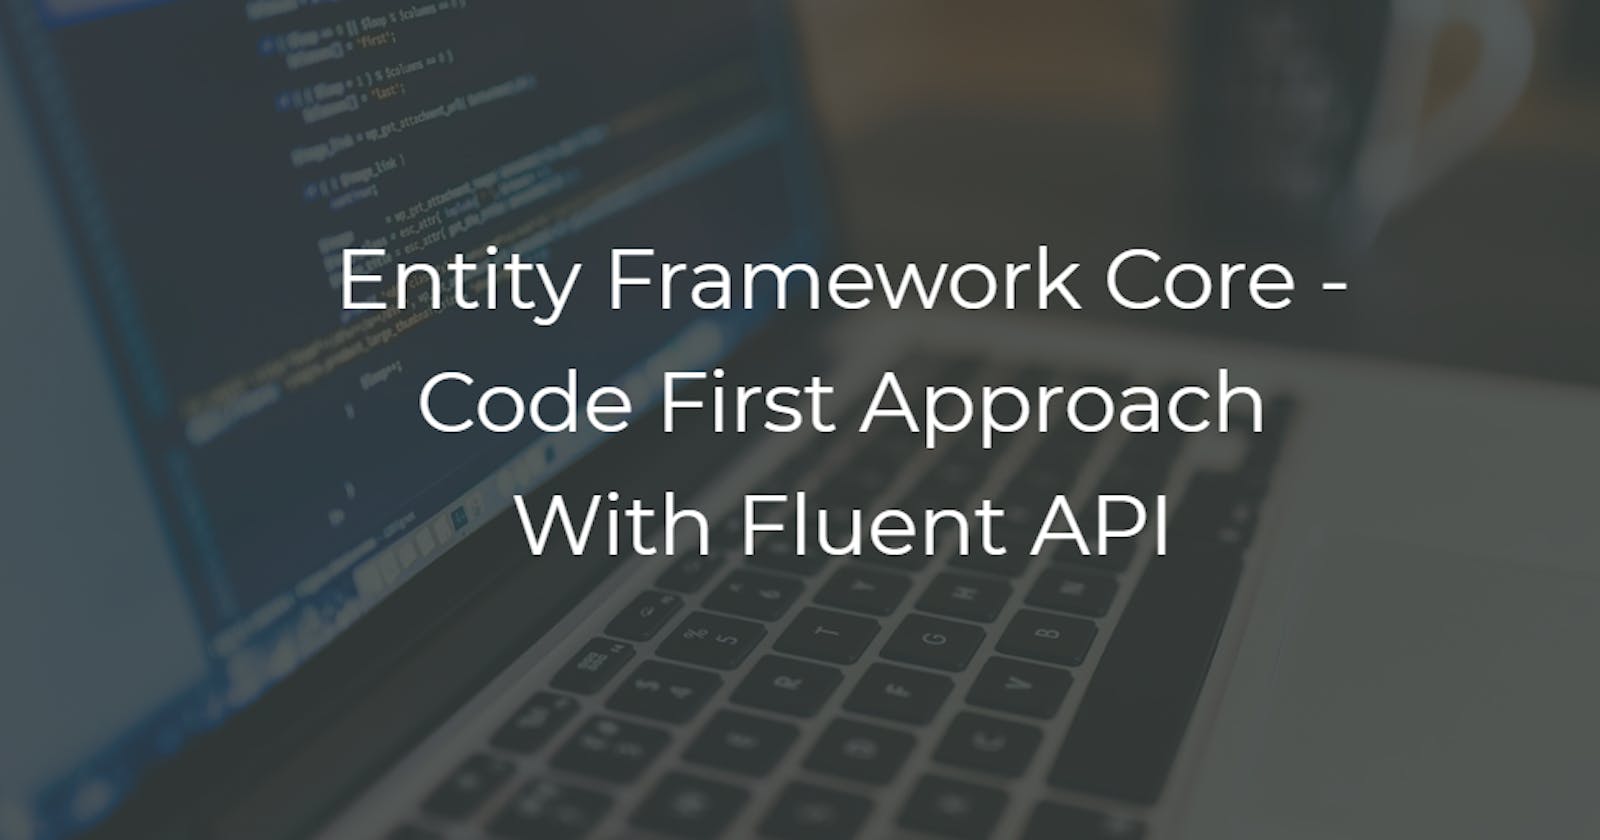 Entity Framework Core - Code First Approach With Fluent API